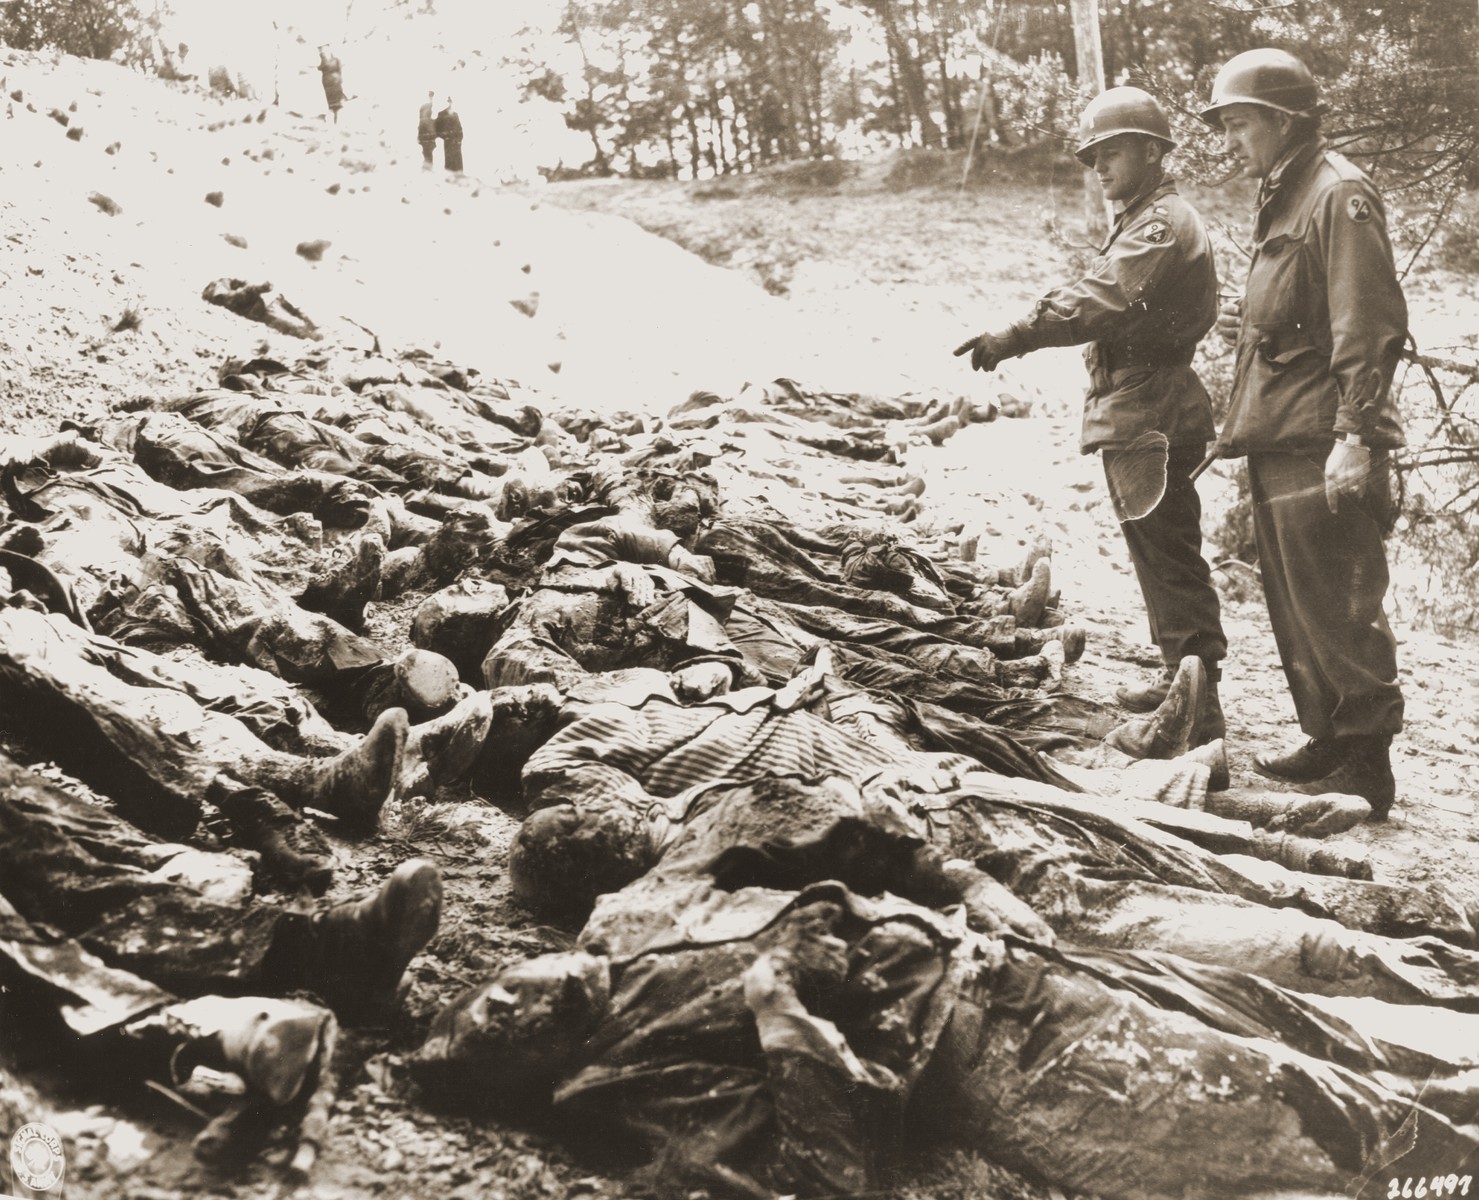 Two American officers with the 94th Division count the bodies of 71 political prisoners exhumed from a mass grave on Wenzelnberg near Solingen-Ohligs.

The victims, most of whom were taken from Luettringhausen prison, were shot and buried by the Gestapo following orders to eliminate all Reich enemies just before the end of the war.